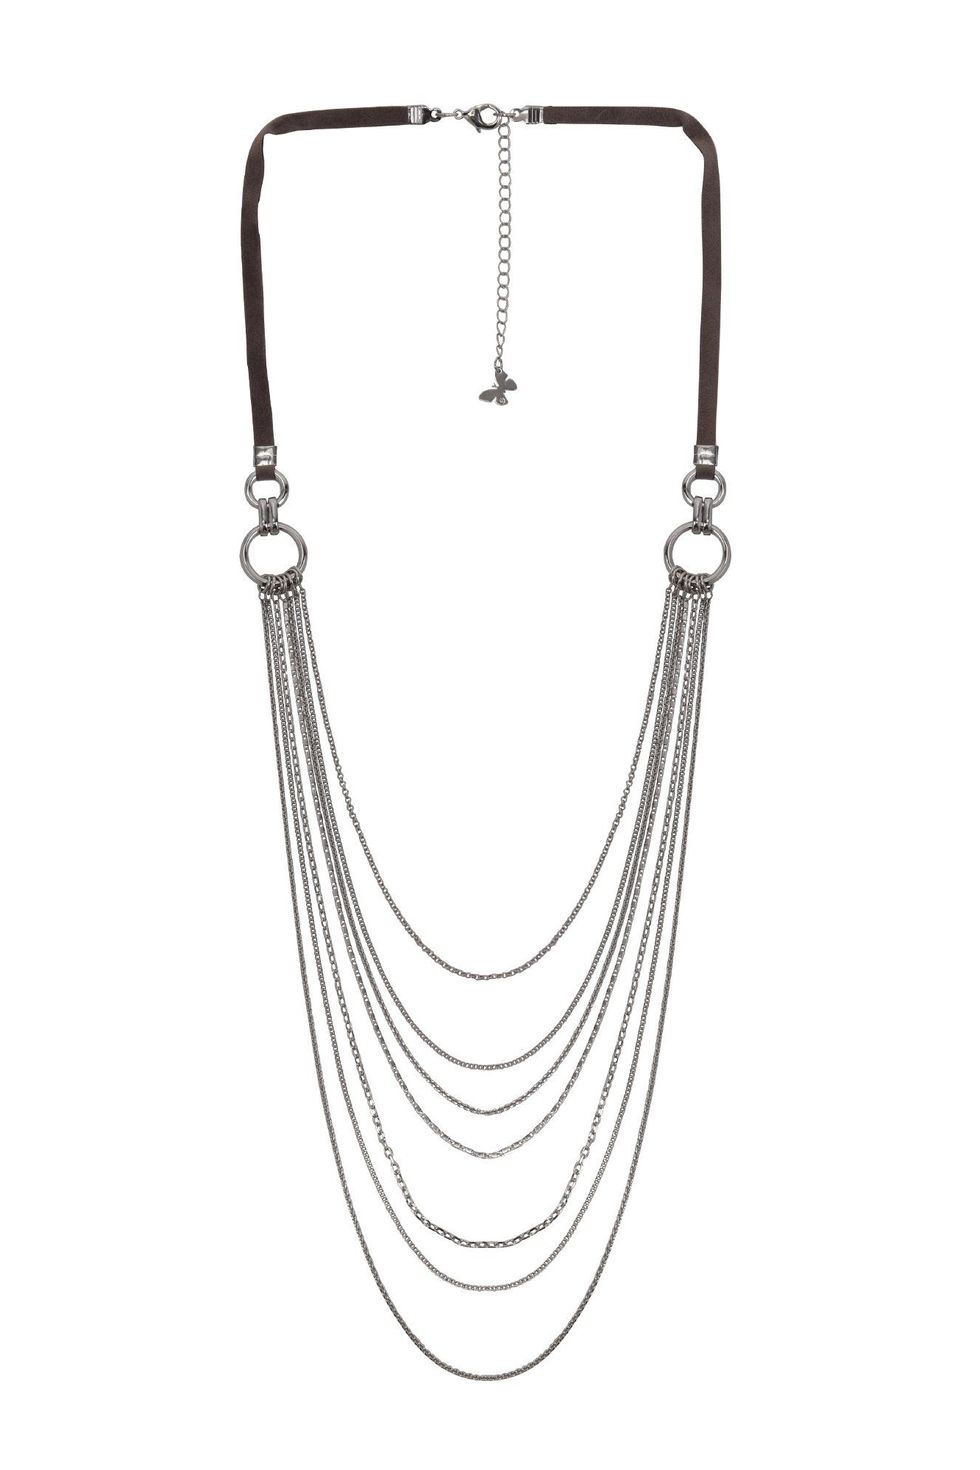 The Pioneer Woman Jewelry, Silver-tone Layered Chain Necklace